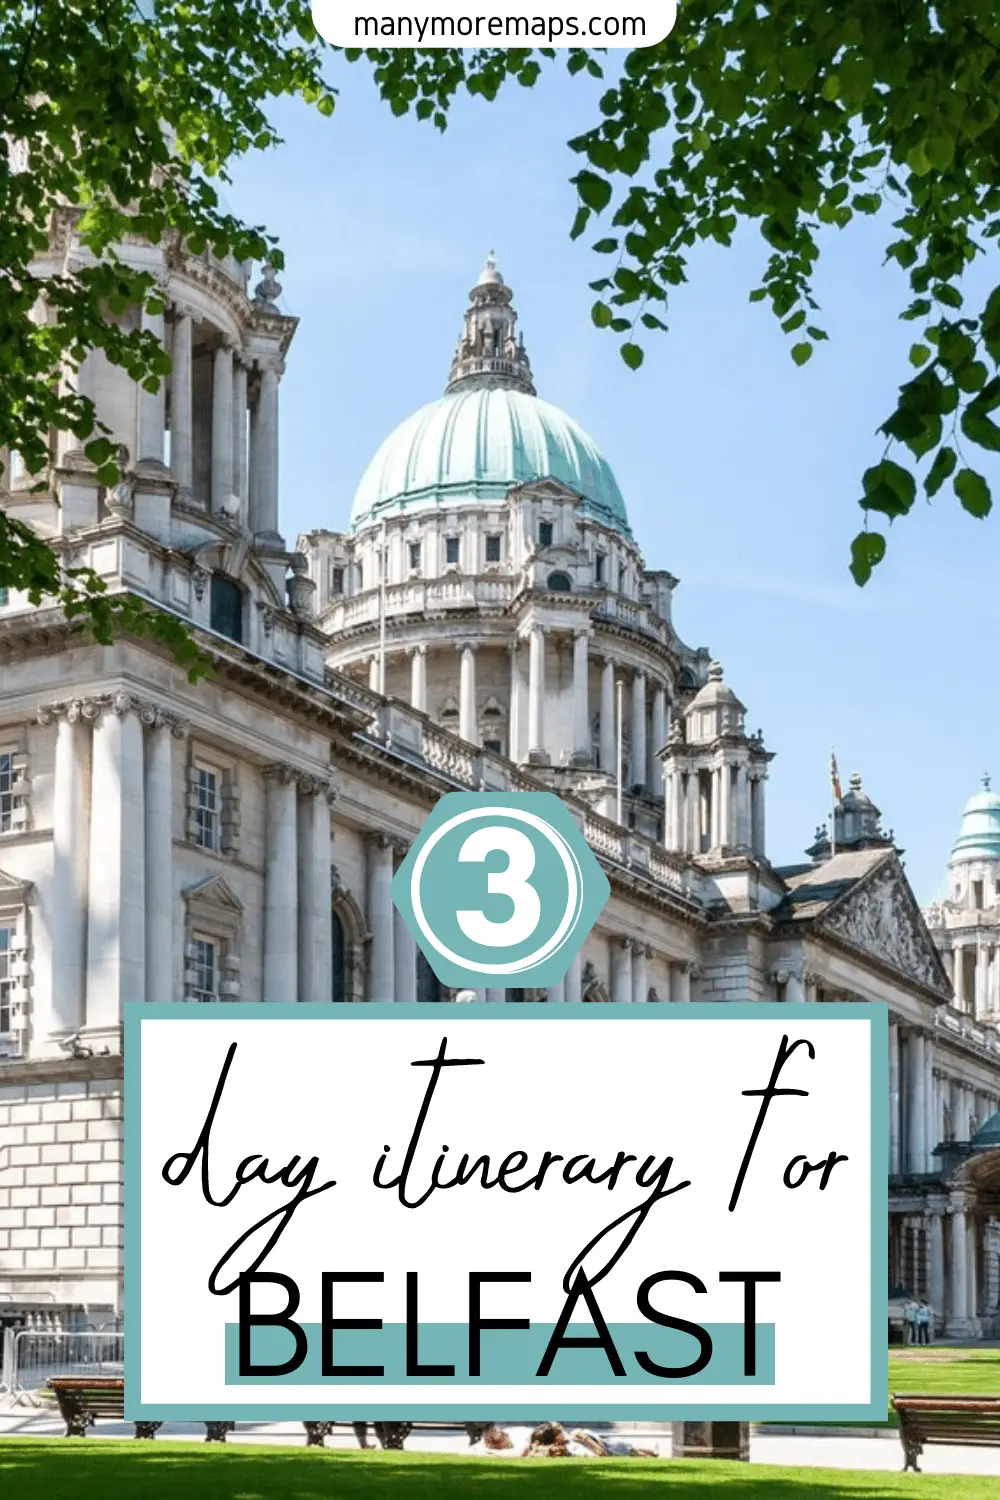 Looking to travel to Belfast, Northern Ireland and need an itinerary? Here are the very best things to do and places to visit in Belfast, as well as extra top travel tips for the Giant's Causeway day trip from Belfast and the famous Titanic Belfast museum.